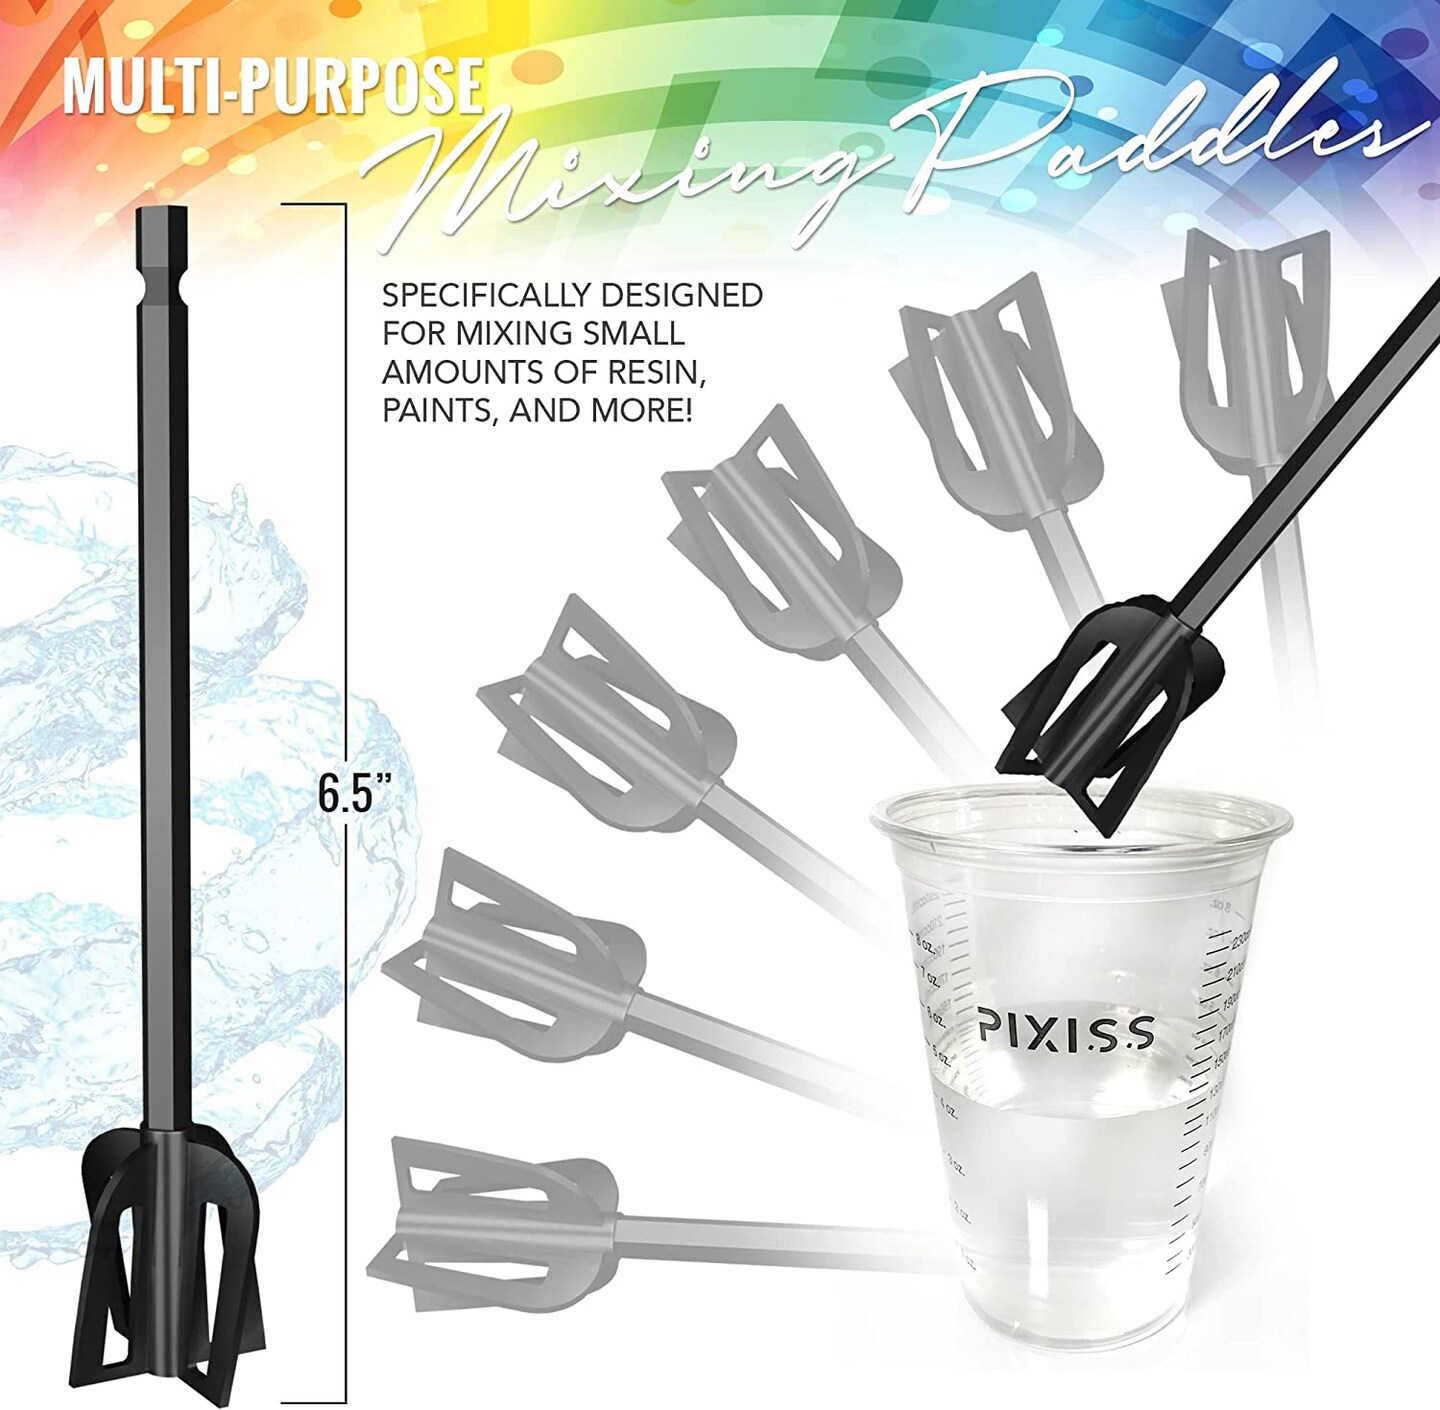 Pixiss Epoxy Resin Mixer - Rechargeable, Electric Handheld Mixer, Includes 3 Paddles